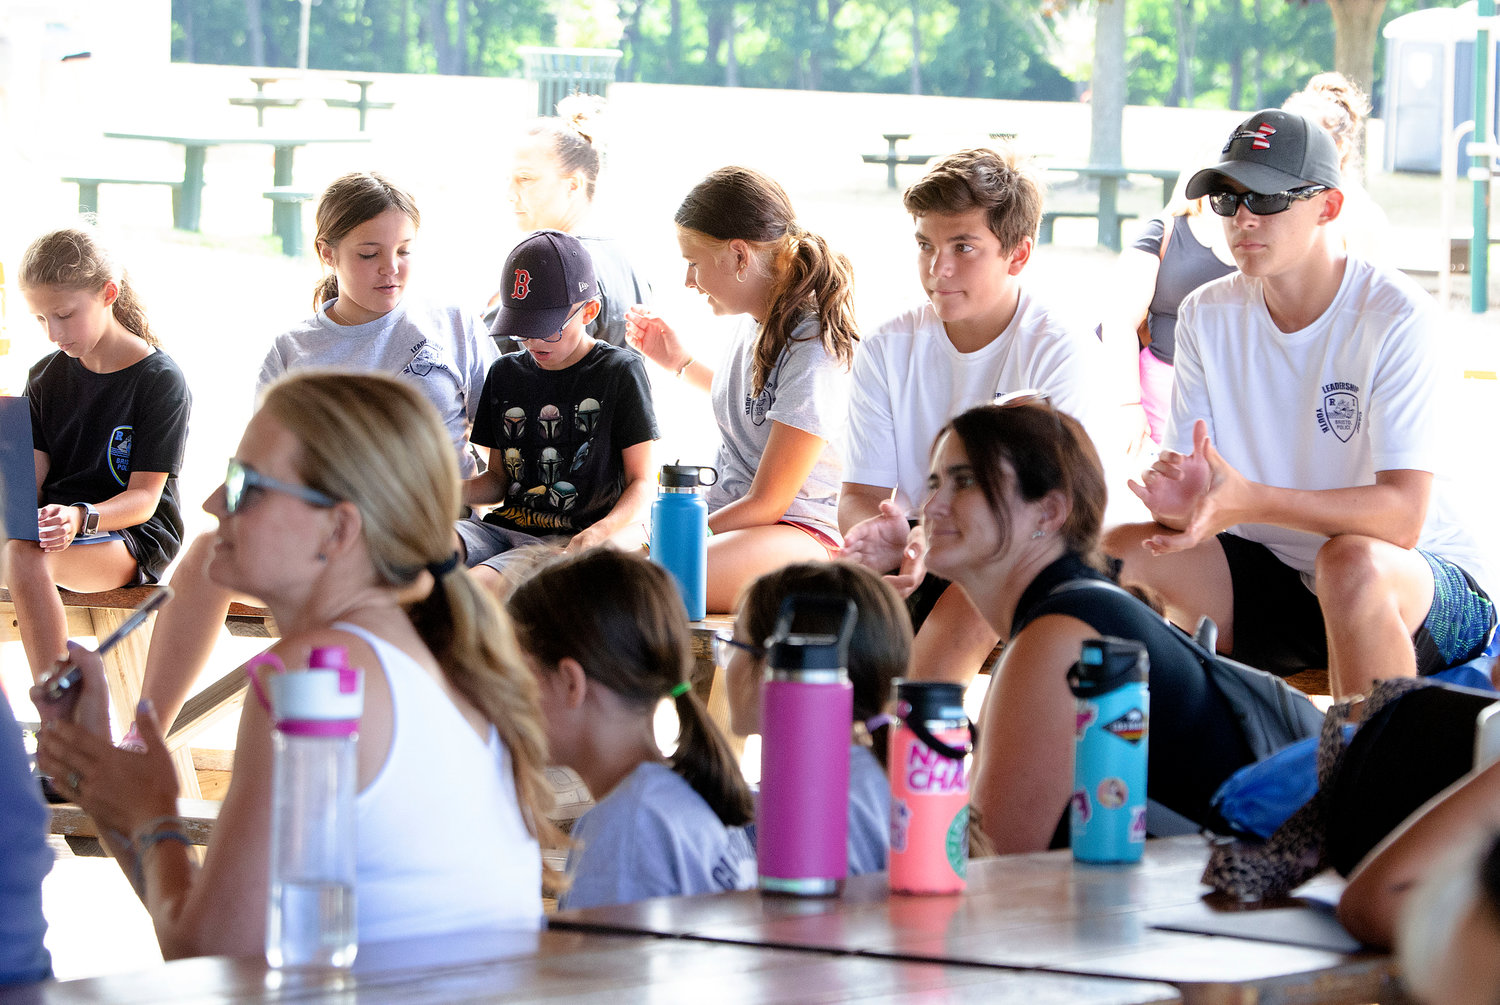 Leadership academy leaders Ella Pirri (left) Domenic Baldinelli and Robert Ennis and others cheer on a camper.